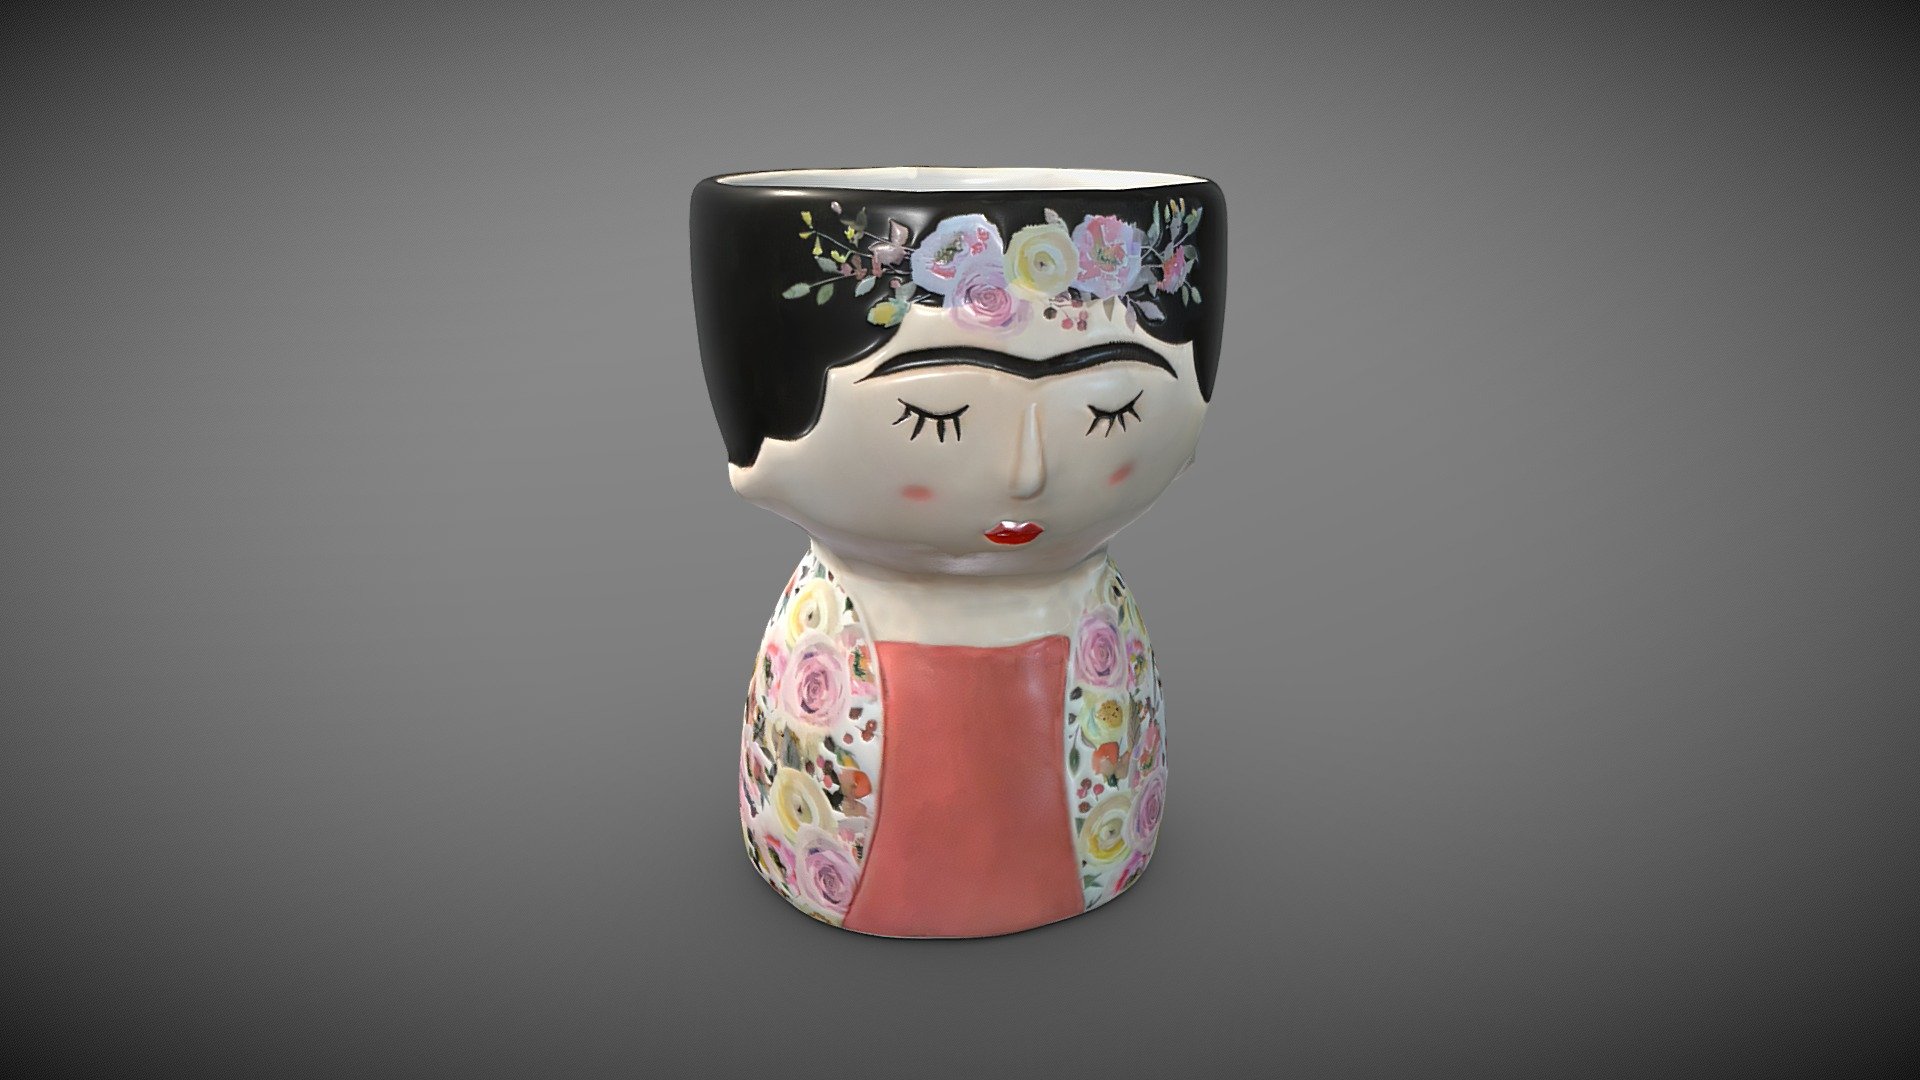 A 3D scan of a vase in the form of Frida Kahlo Head. The vase is made of ceramic and handpainted.

The additional file includes: 





.FBX format file




.OBJ format file




.uasset for Unreal Engine (made with UE 5.0, fully compatible with newer versions of UE)




all the textures with different resolutions: 4K, 2K, HD.



The mesh has a clean topology (not the heavy one of the original scan) to suit a lighter workflow, new UV and baked textures.

Normal maps are provided both in OpengGL and DirectX for game engines.

UASSET

The asset is made with Unreal Engine 5.0, so it's fully compatible with newer versions of Unreal Engine.

The folder is ready to import into Unreal Engine projects Content folders. 

The asset has generated collisions.

The material has the master material and a material instance with parameters to control the intensity of the maps.

The mesh supports Nanite for Unreal Engine 5.0+ and also has 4 LOD:




LOD 0: 10.520 tris

LOD 1: 2.630 tris

LOD 2: 3.360 tris

LOD 3: 1.314 tris
 - Frida Kahlo Head Vase 3D Scan - Buy Royalty Free 3D model by 3DRstudio 3d model